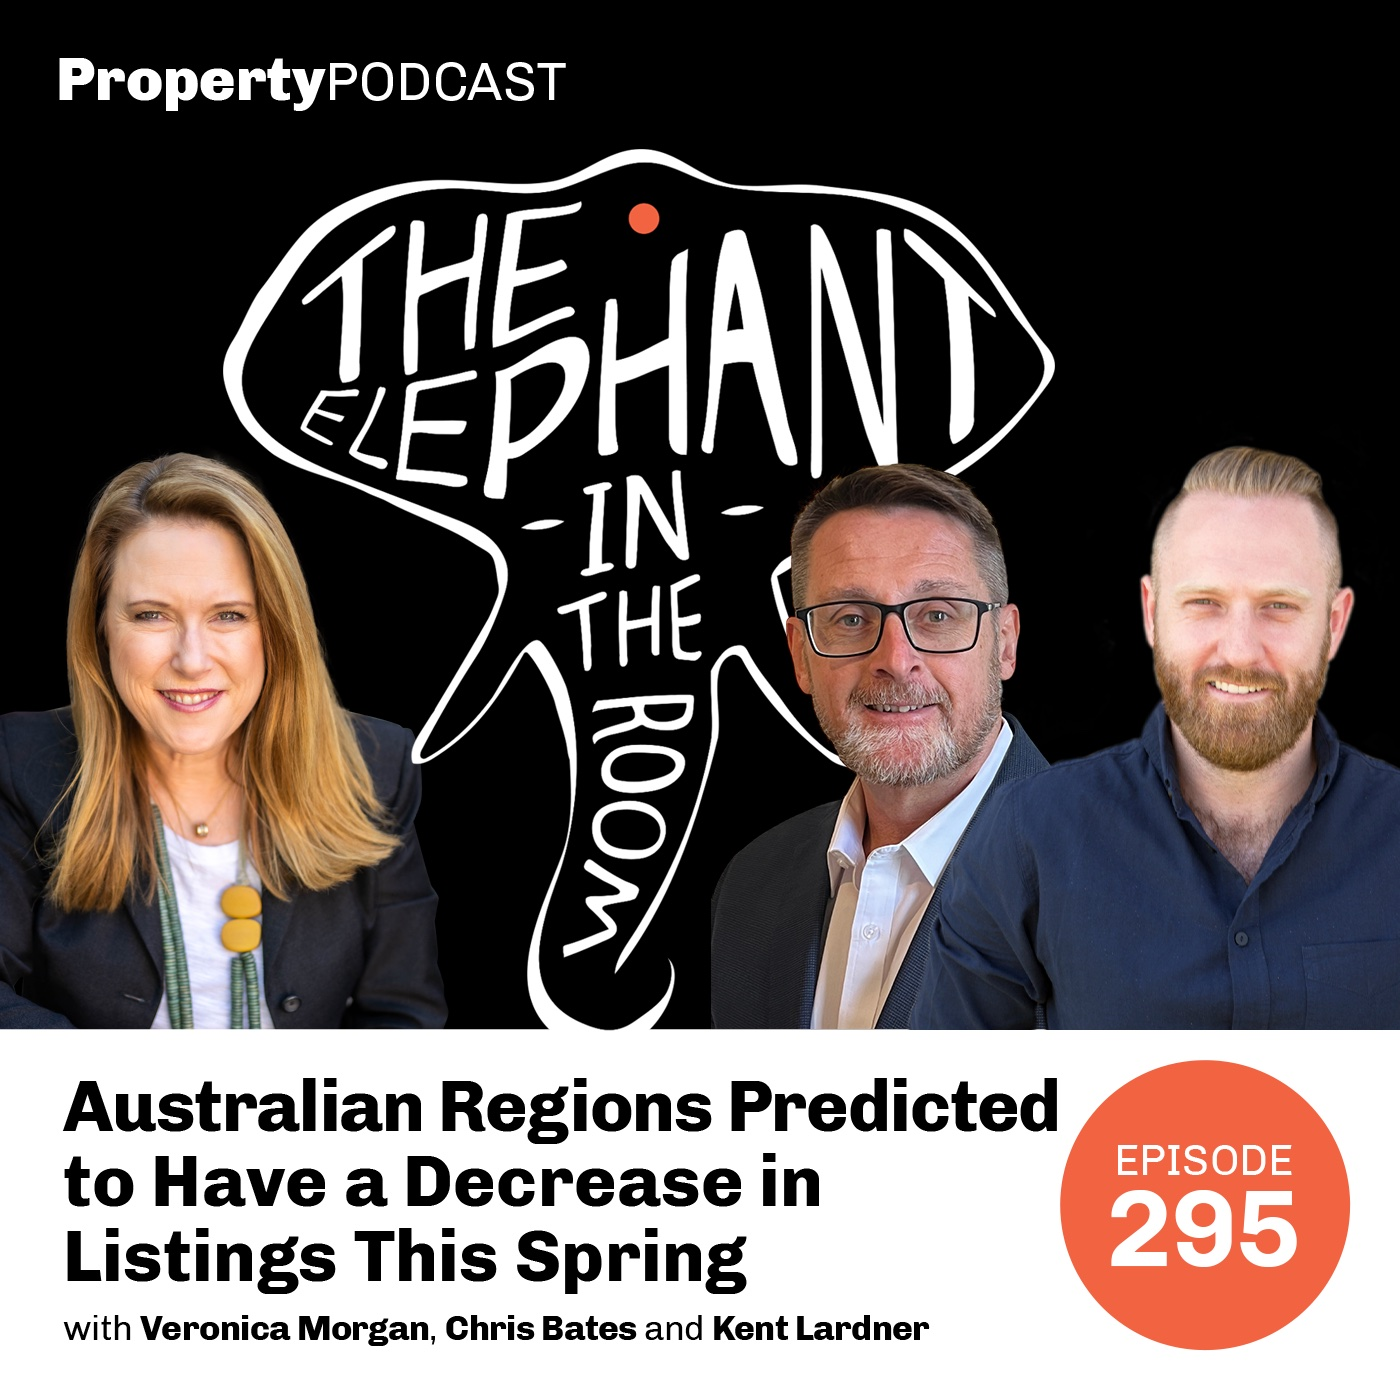 Australian Regions Predicted to Have a Decrease in Listings This Spring